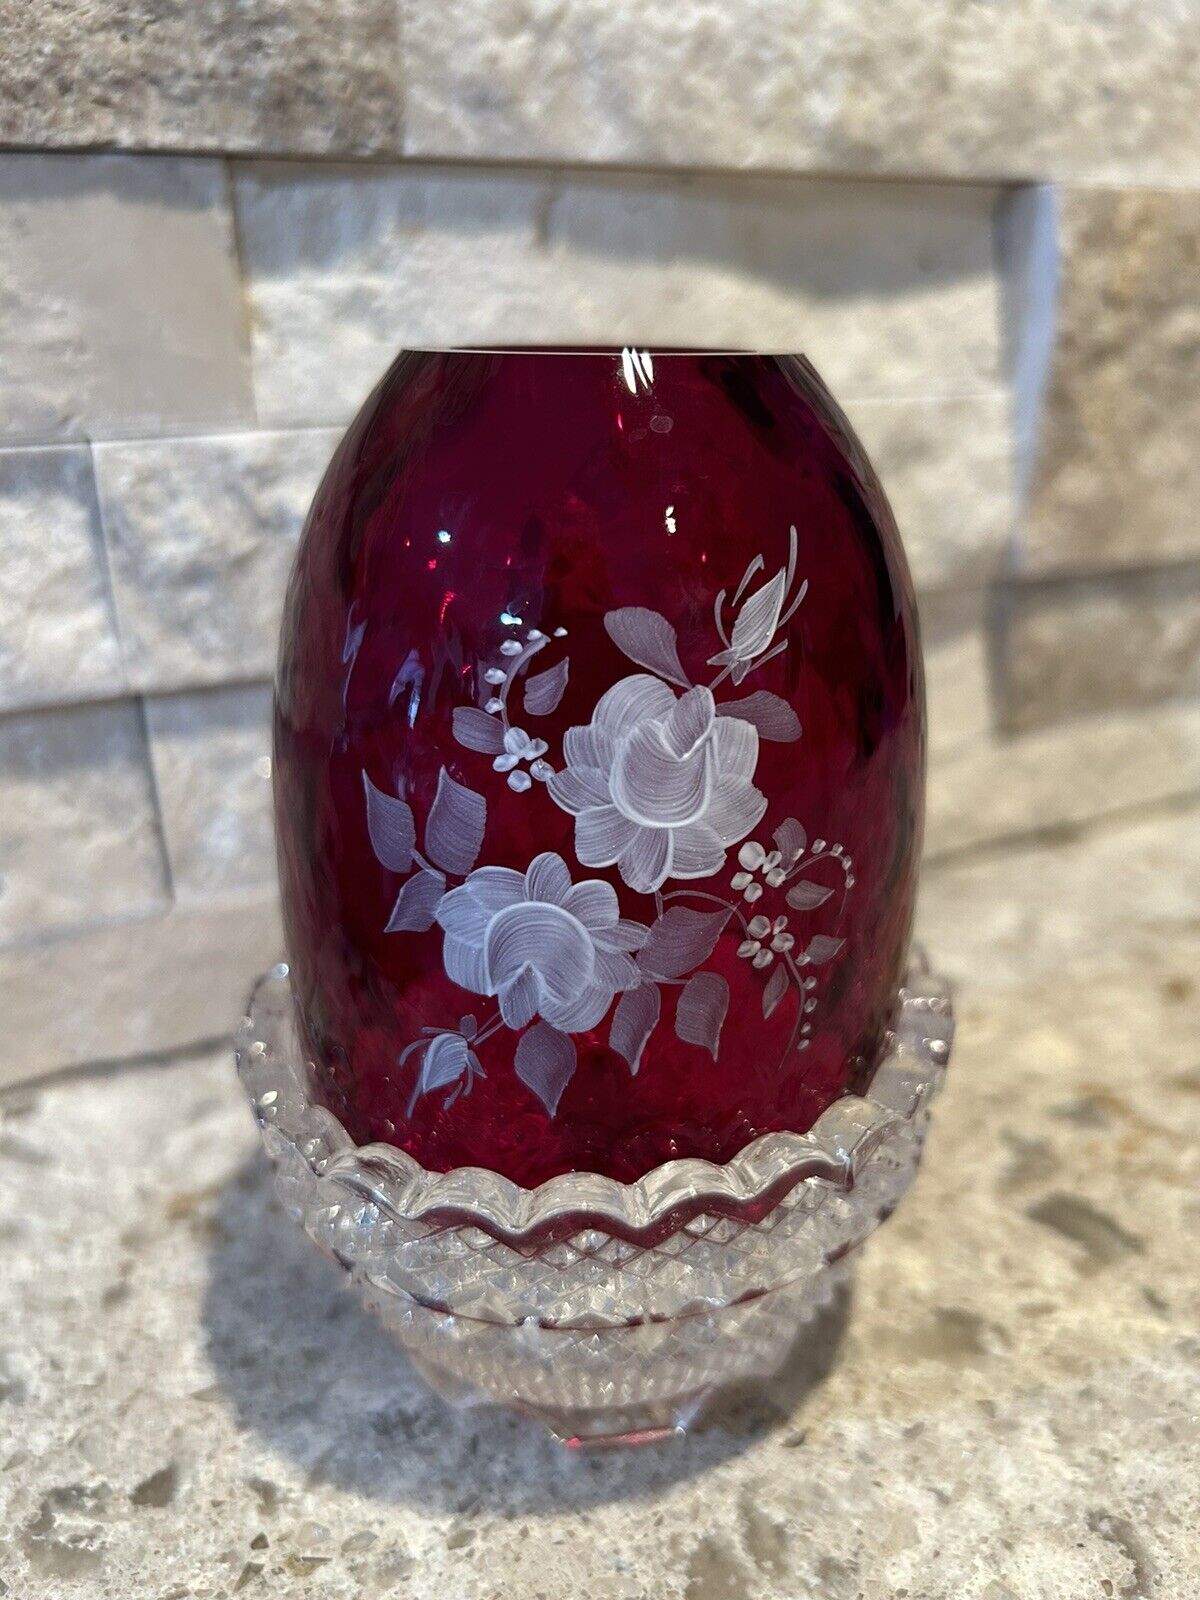 Fenton Fairy Lamp Ruby Red White Roses Crystal Base Votive Candle Holder 4.5”